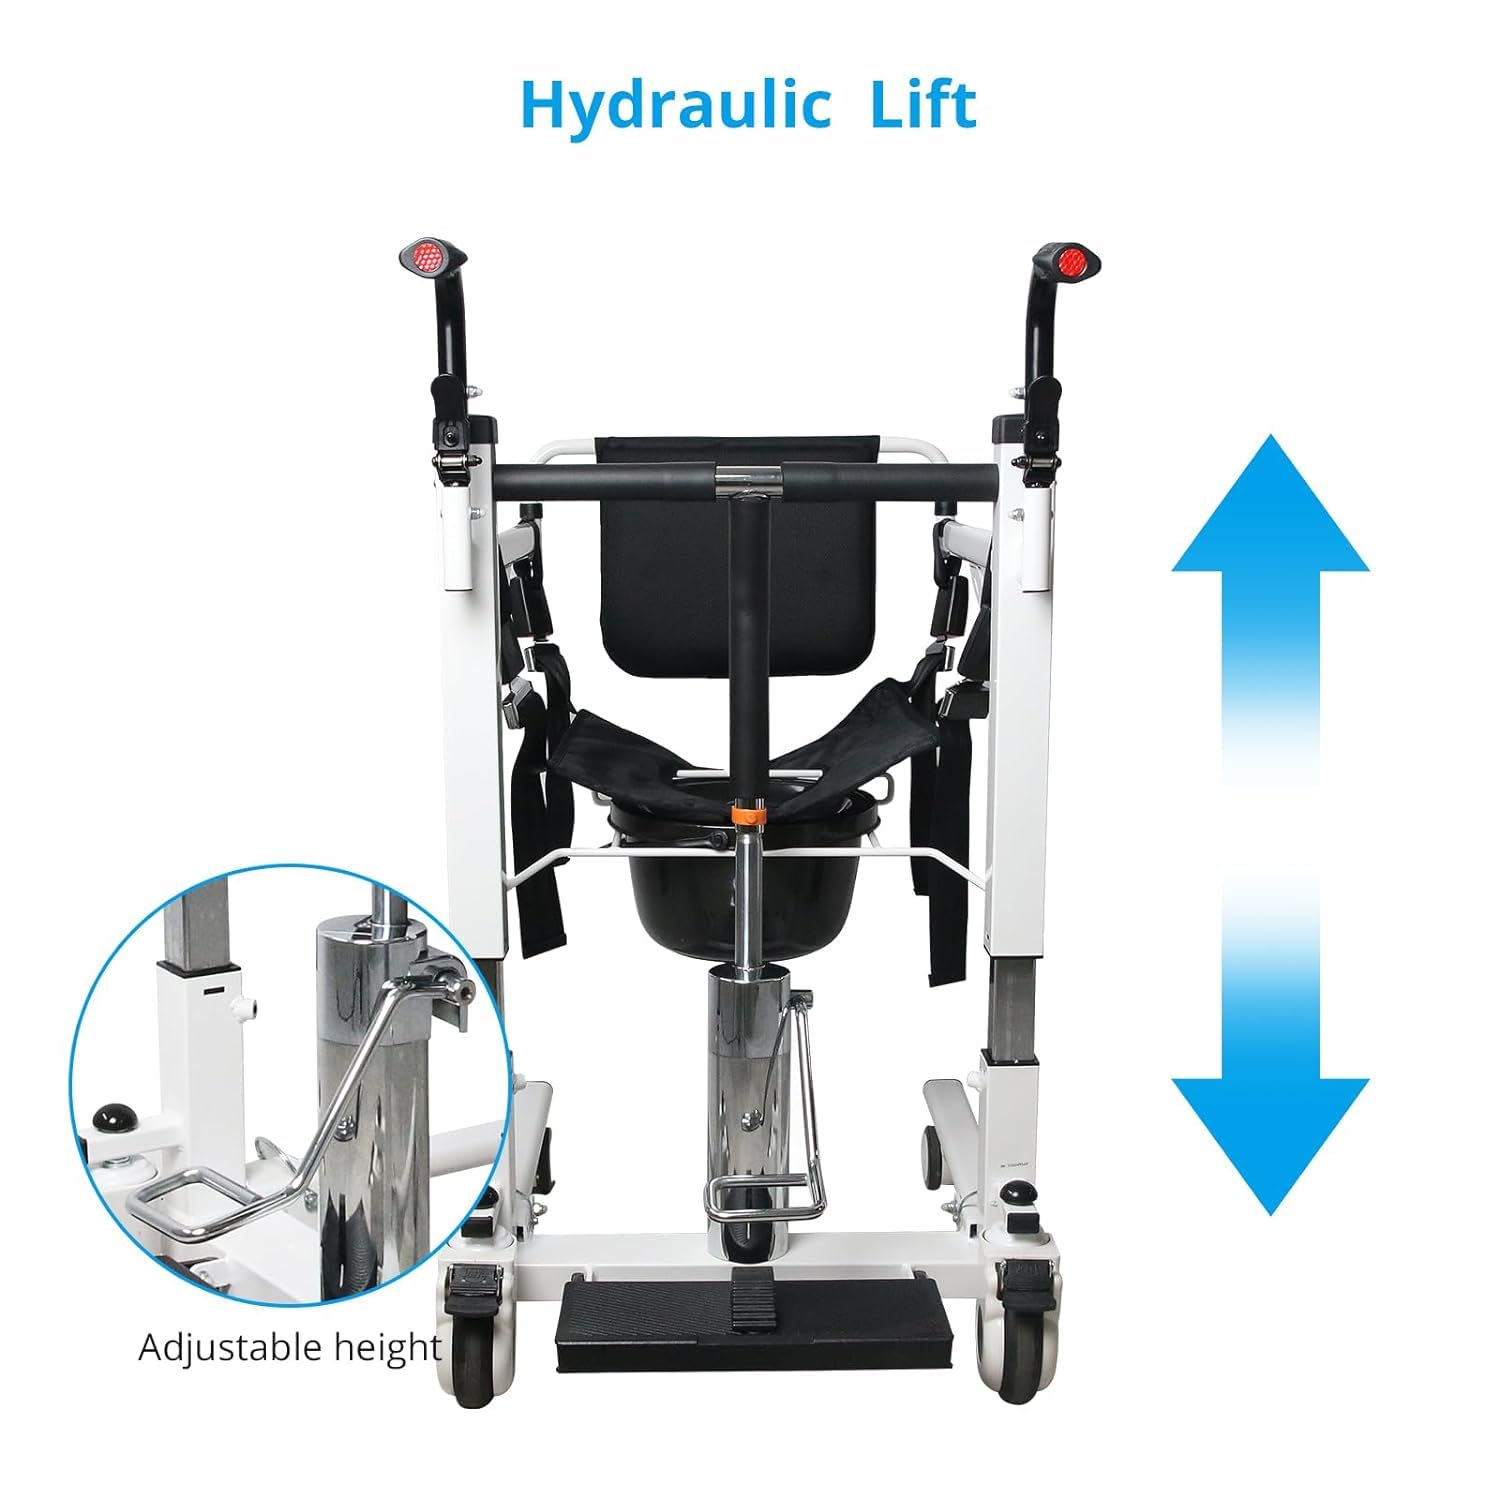 Patient Lift Transfer Chair,KIMORE Hoyer Lifts for Home Use,Hydraulic Patient Lift Transfer Chair, Bathroom Wheelchair with 180° Split Seat and Potty, Portable Elderly Lift aid Bedside Commode Chair